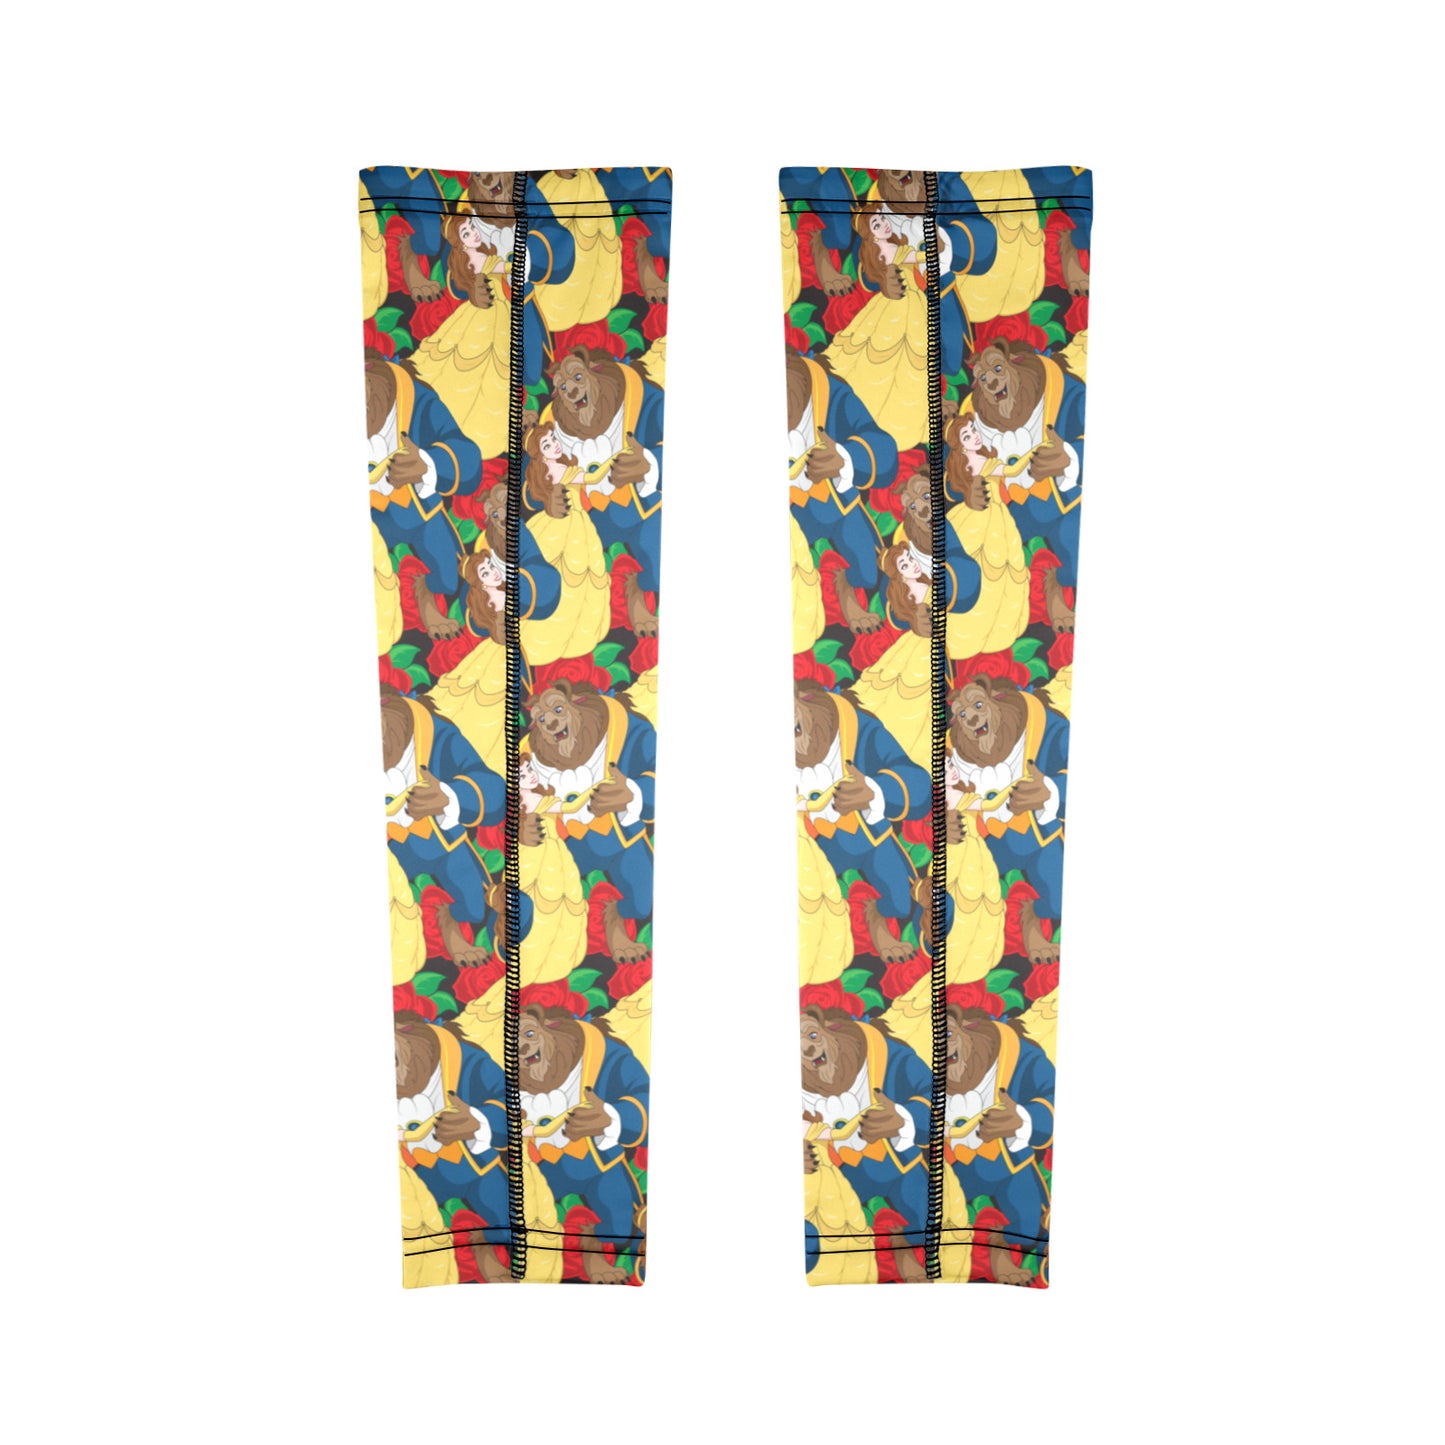 Dancing Beauty Arm Sleeves (Set of Two)